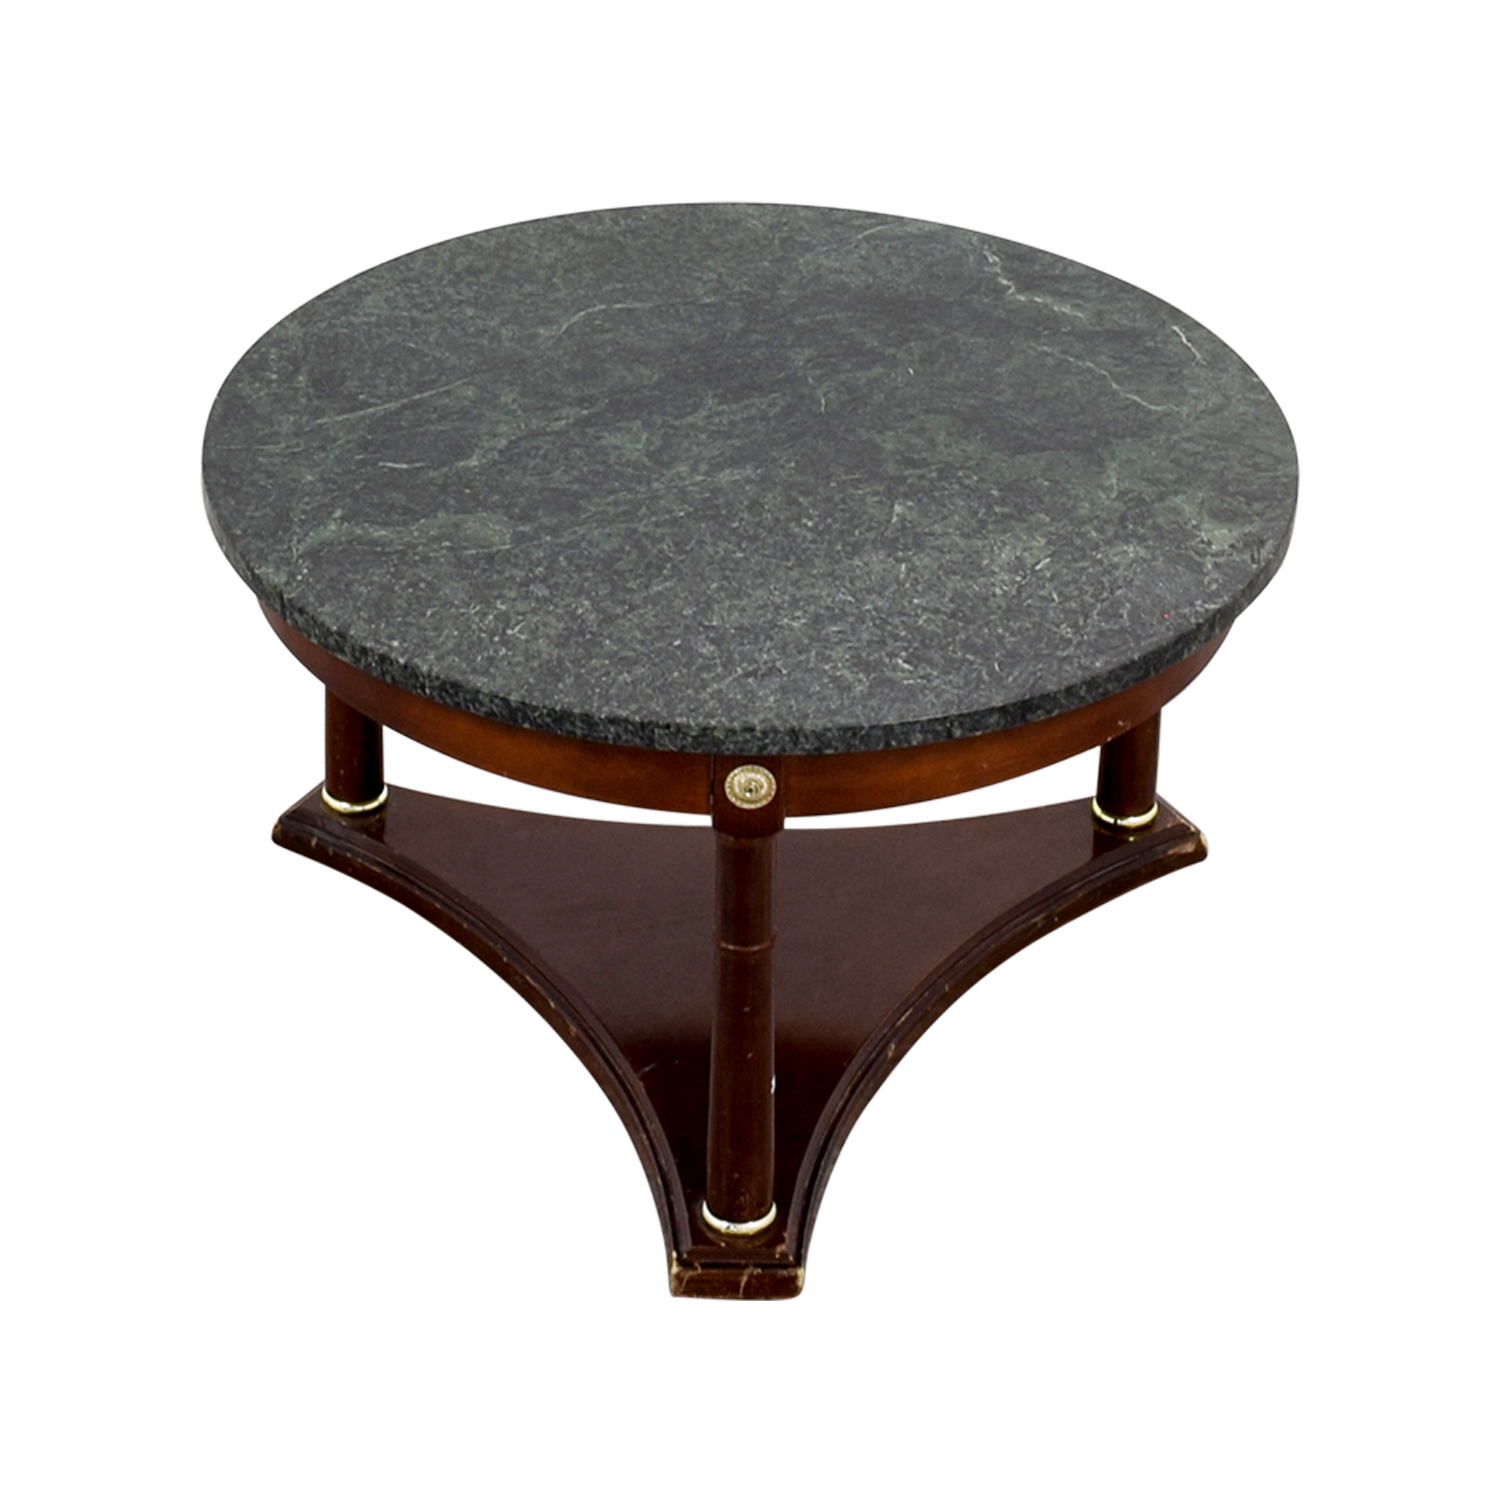 off green marble side table tables used accent coupon wood slab round metal target seater patio set black lacquer coffee world market small outdoor bench brown martin home